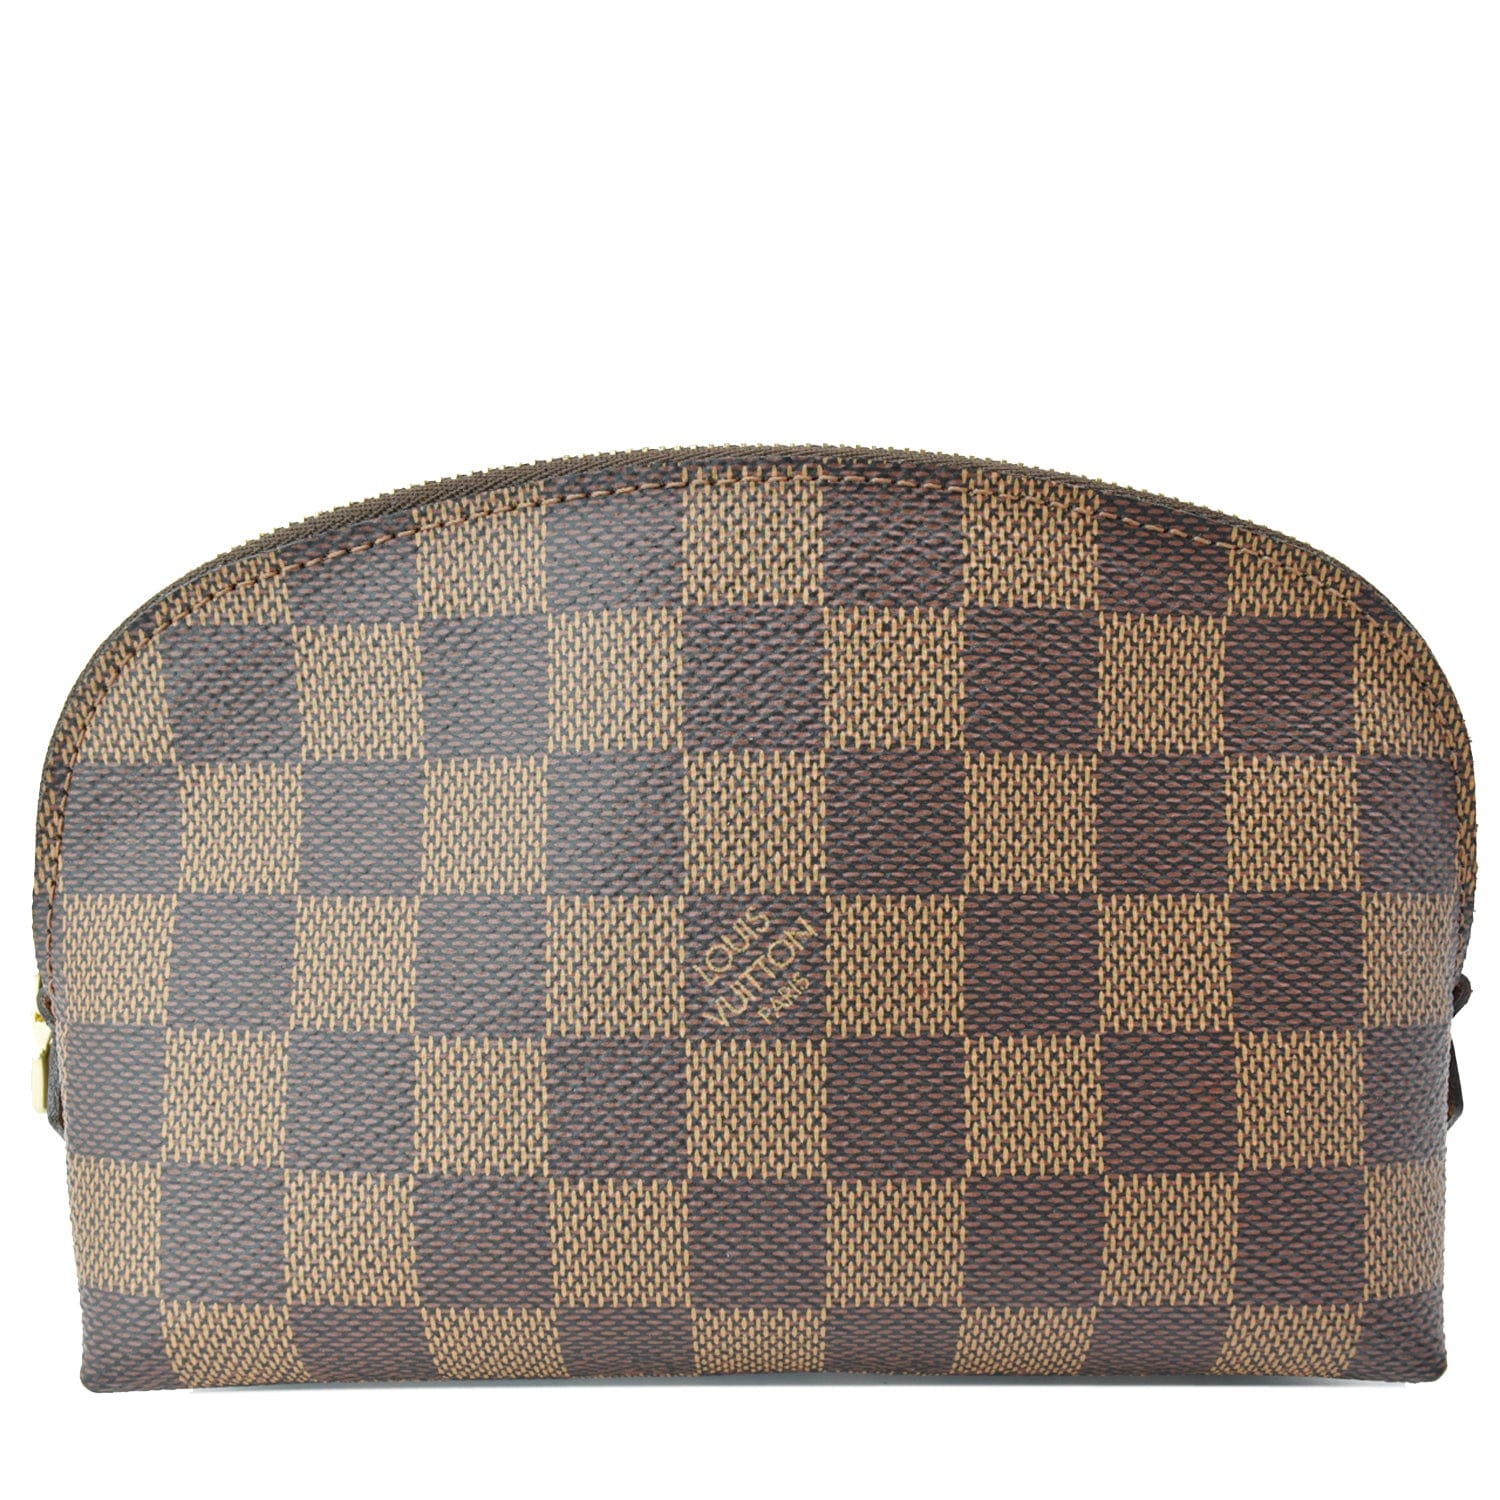 Louis Vuitton Cosmetic Pouch Damier Azure in Very Good / Mint